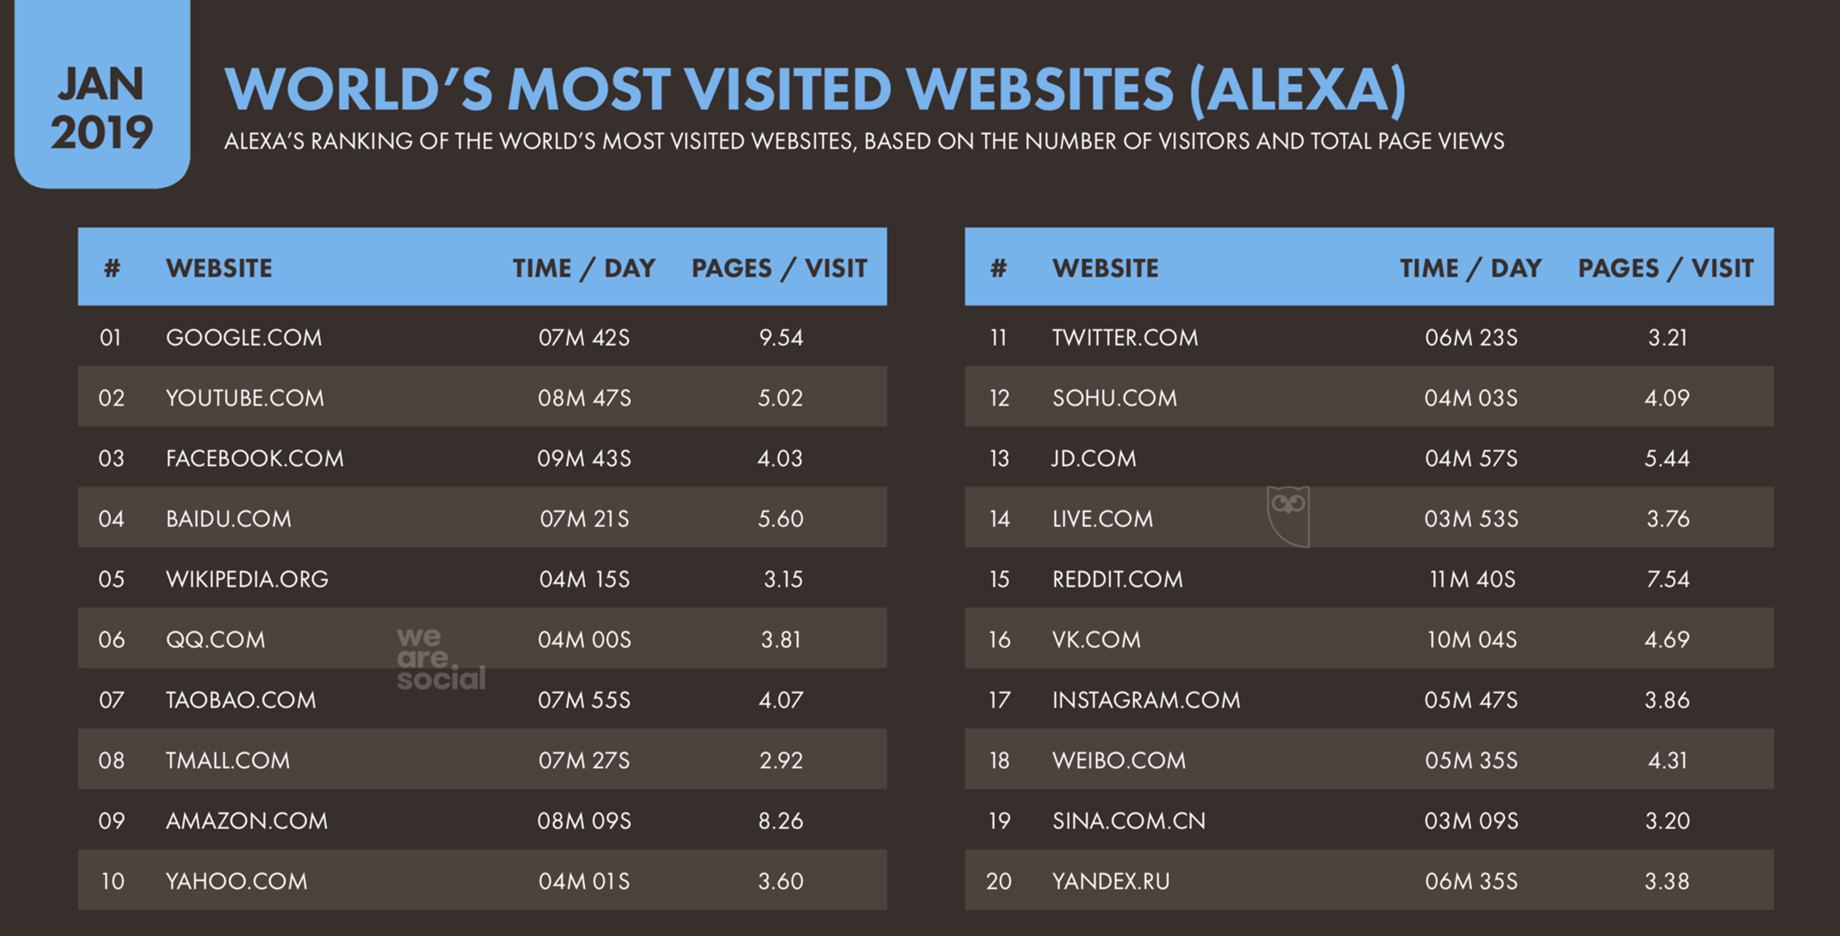 Worlds Most Visited Websites Alexa Ranking - Based on the Number of Visitors and Total Page Views